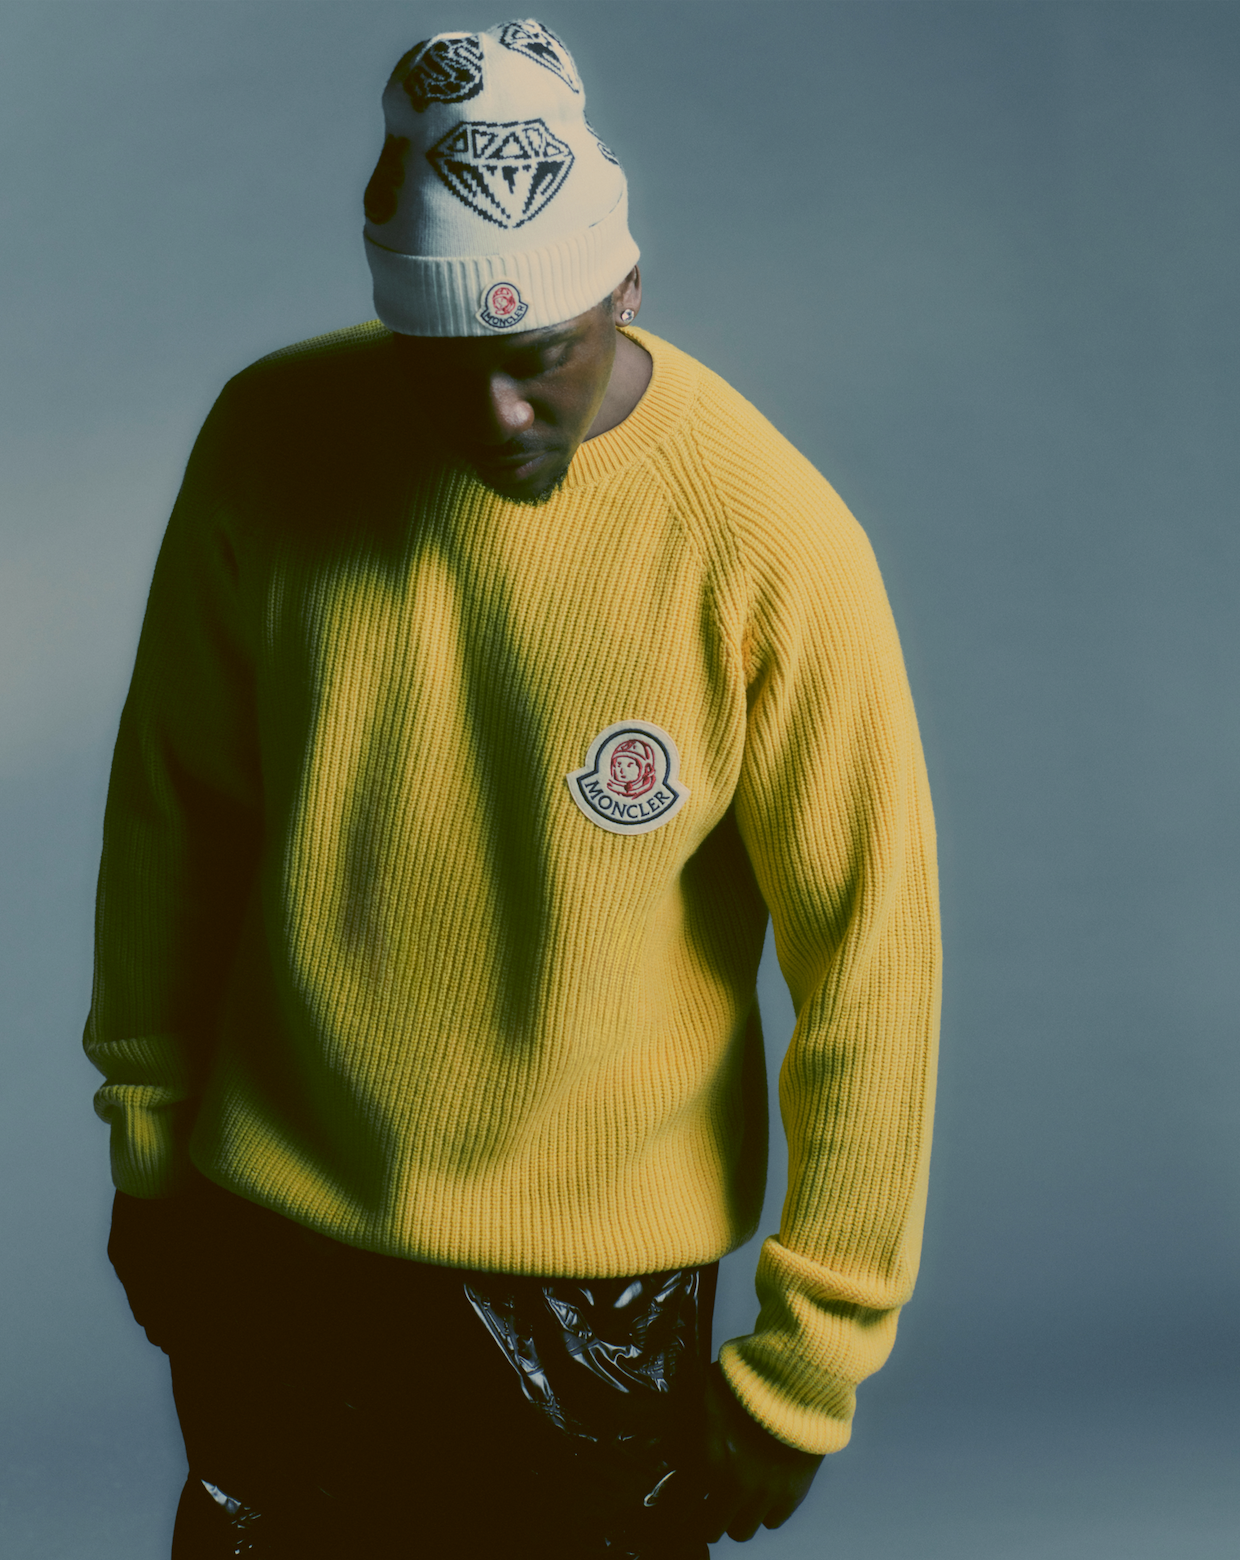 Billionaire Boys Club Collaborates With Moncler To Celebrate 20th Anniversary 